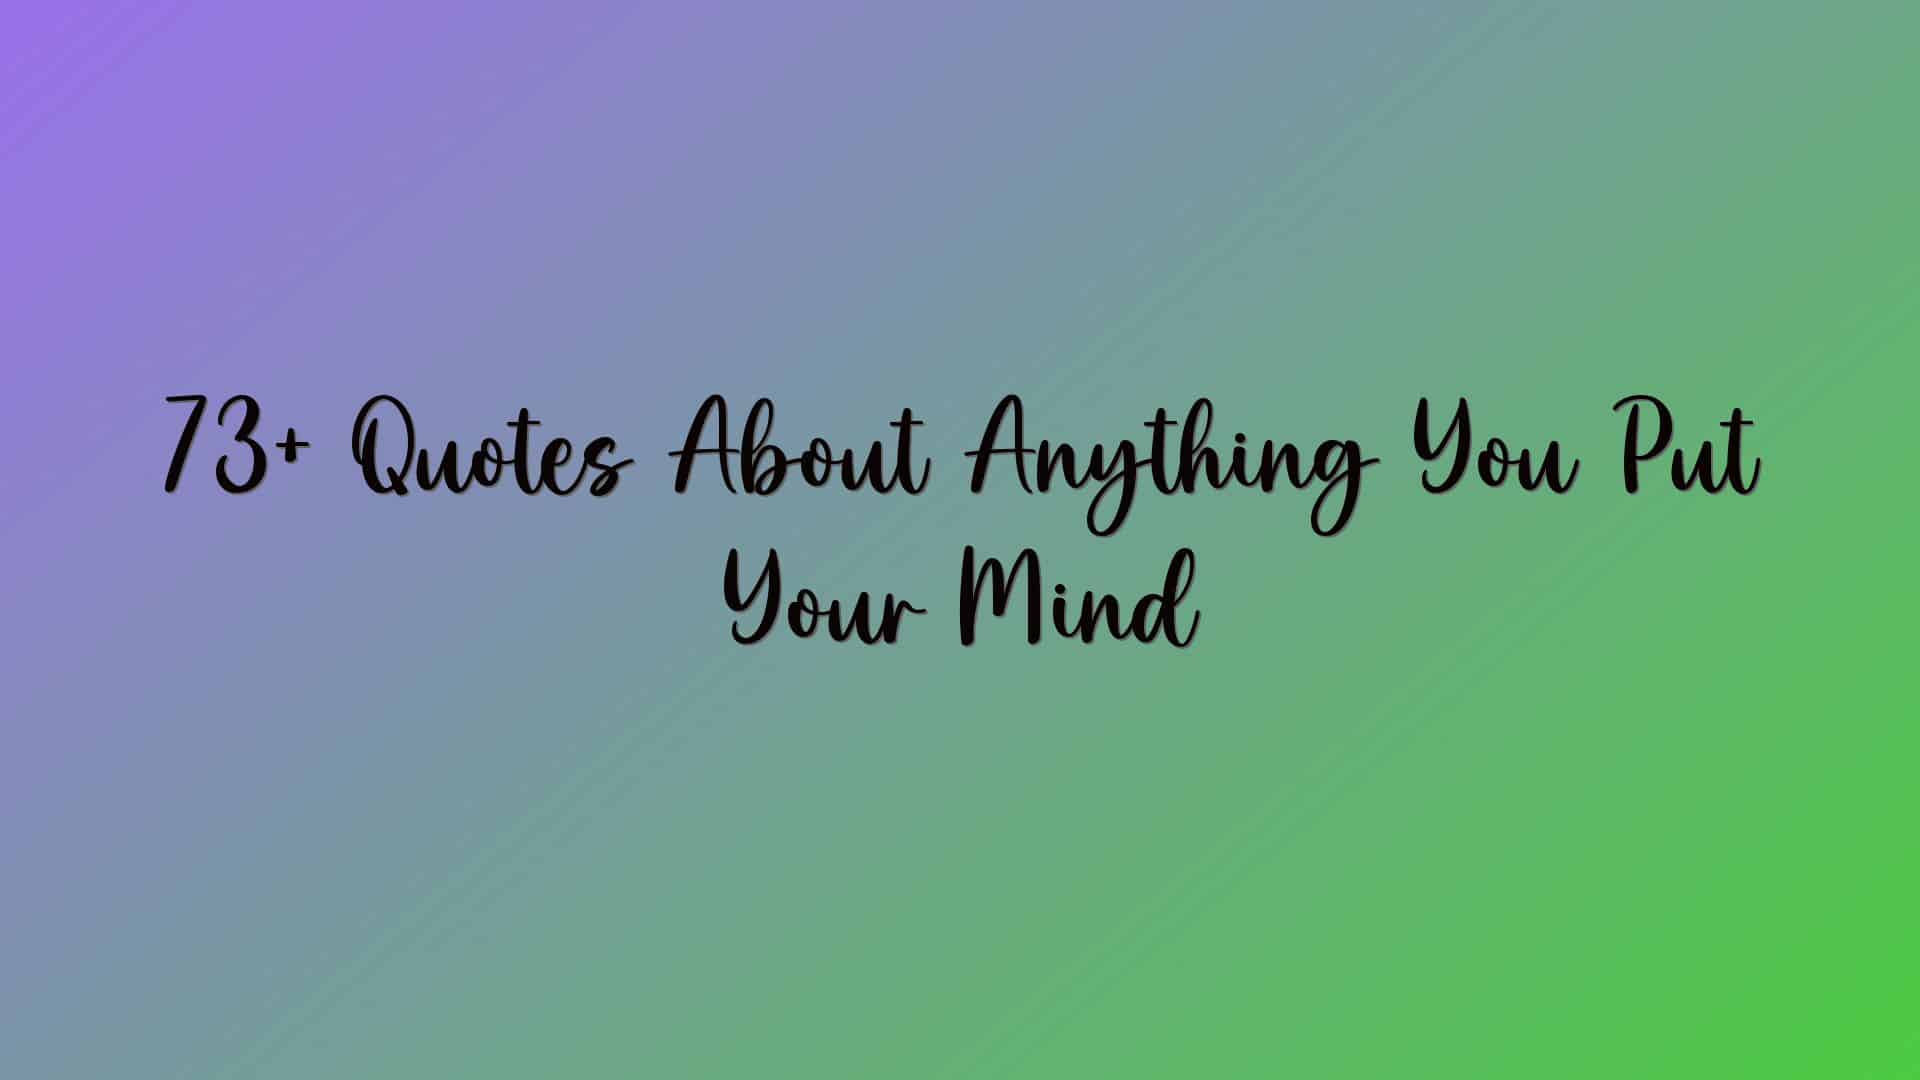 73+ Quotes About Anything You Put Your Mind